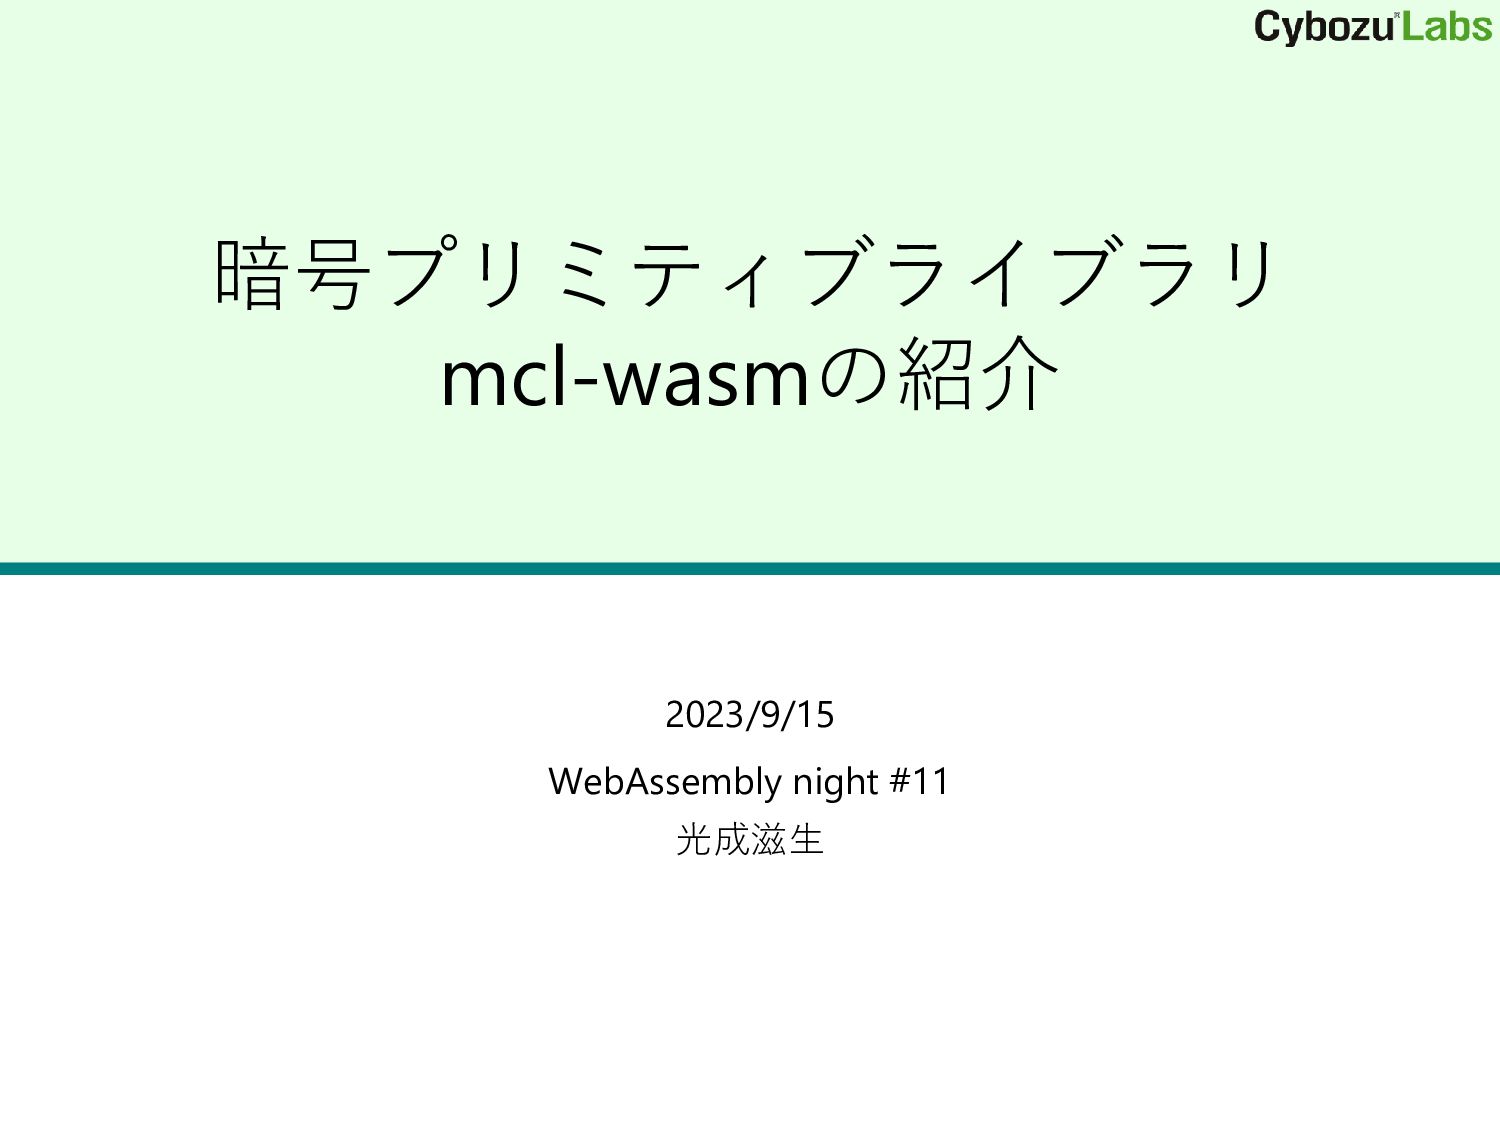 Slide Top: Introduction to mcl-wasm